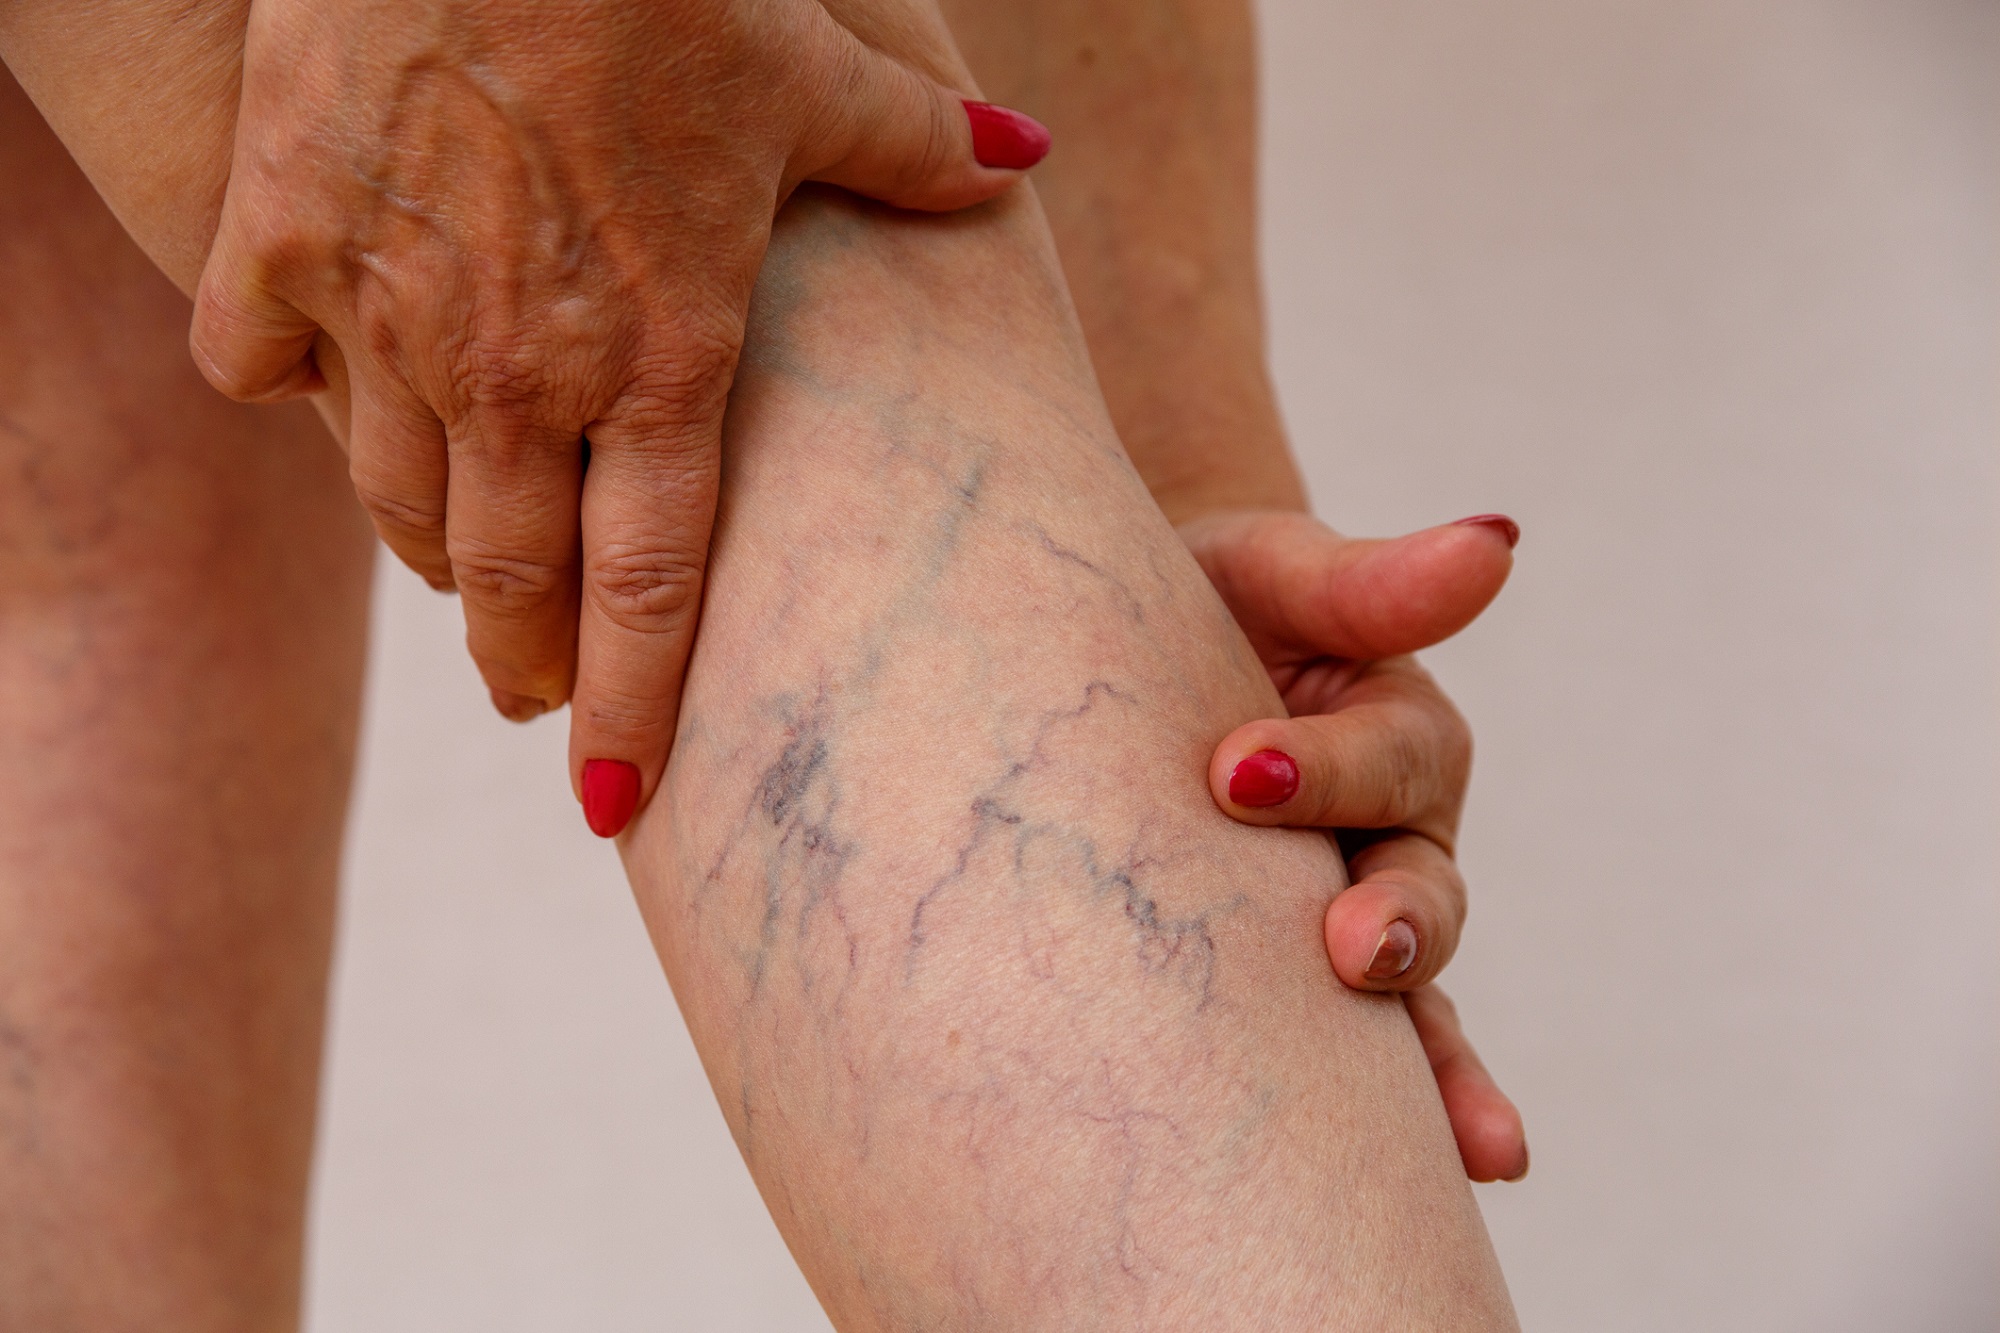 Imaging test for varicose veins